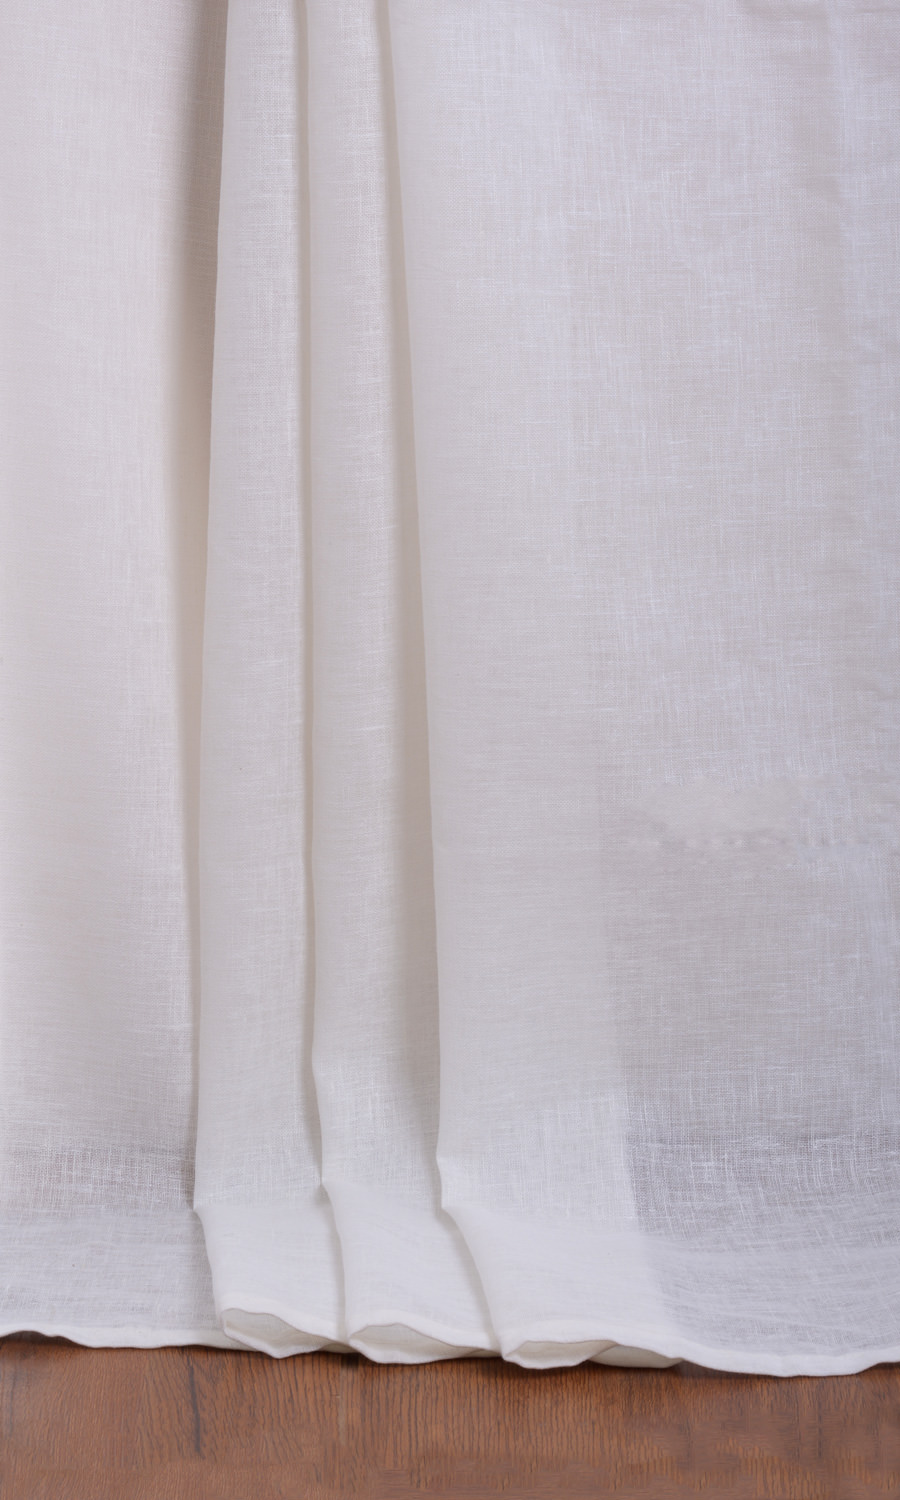 Illusion Detailed Texture White Sheer Curtains